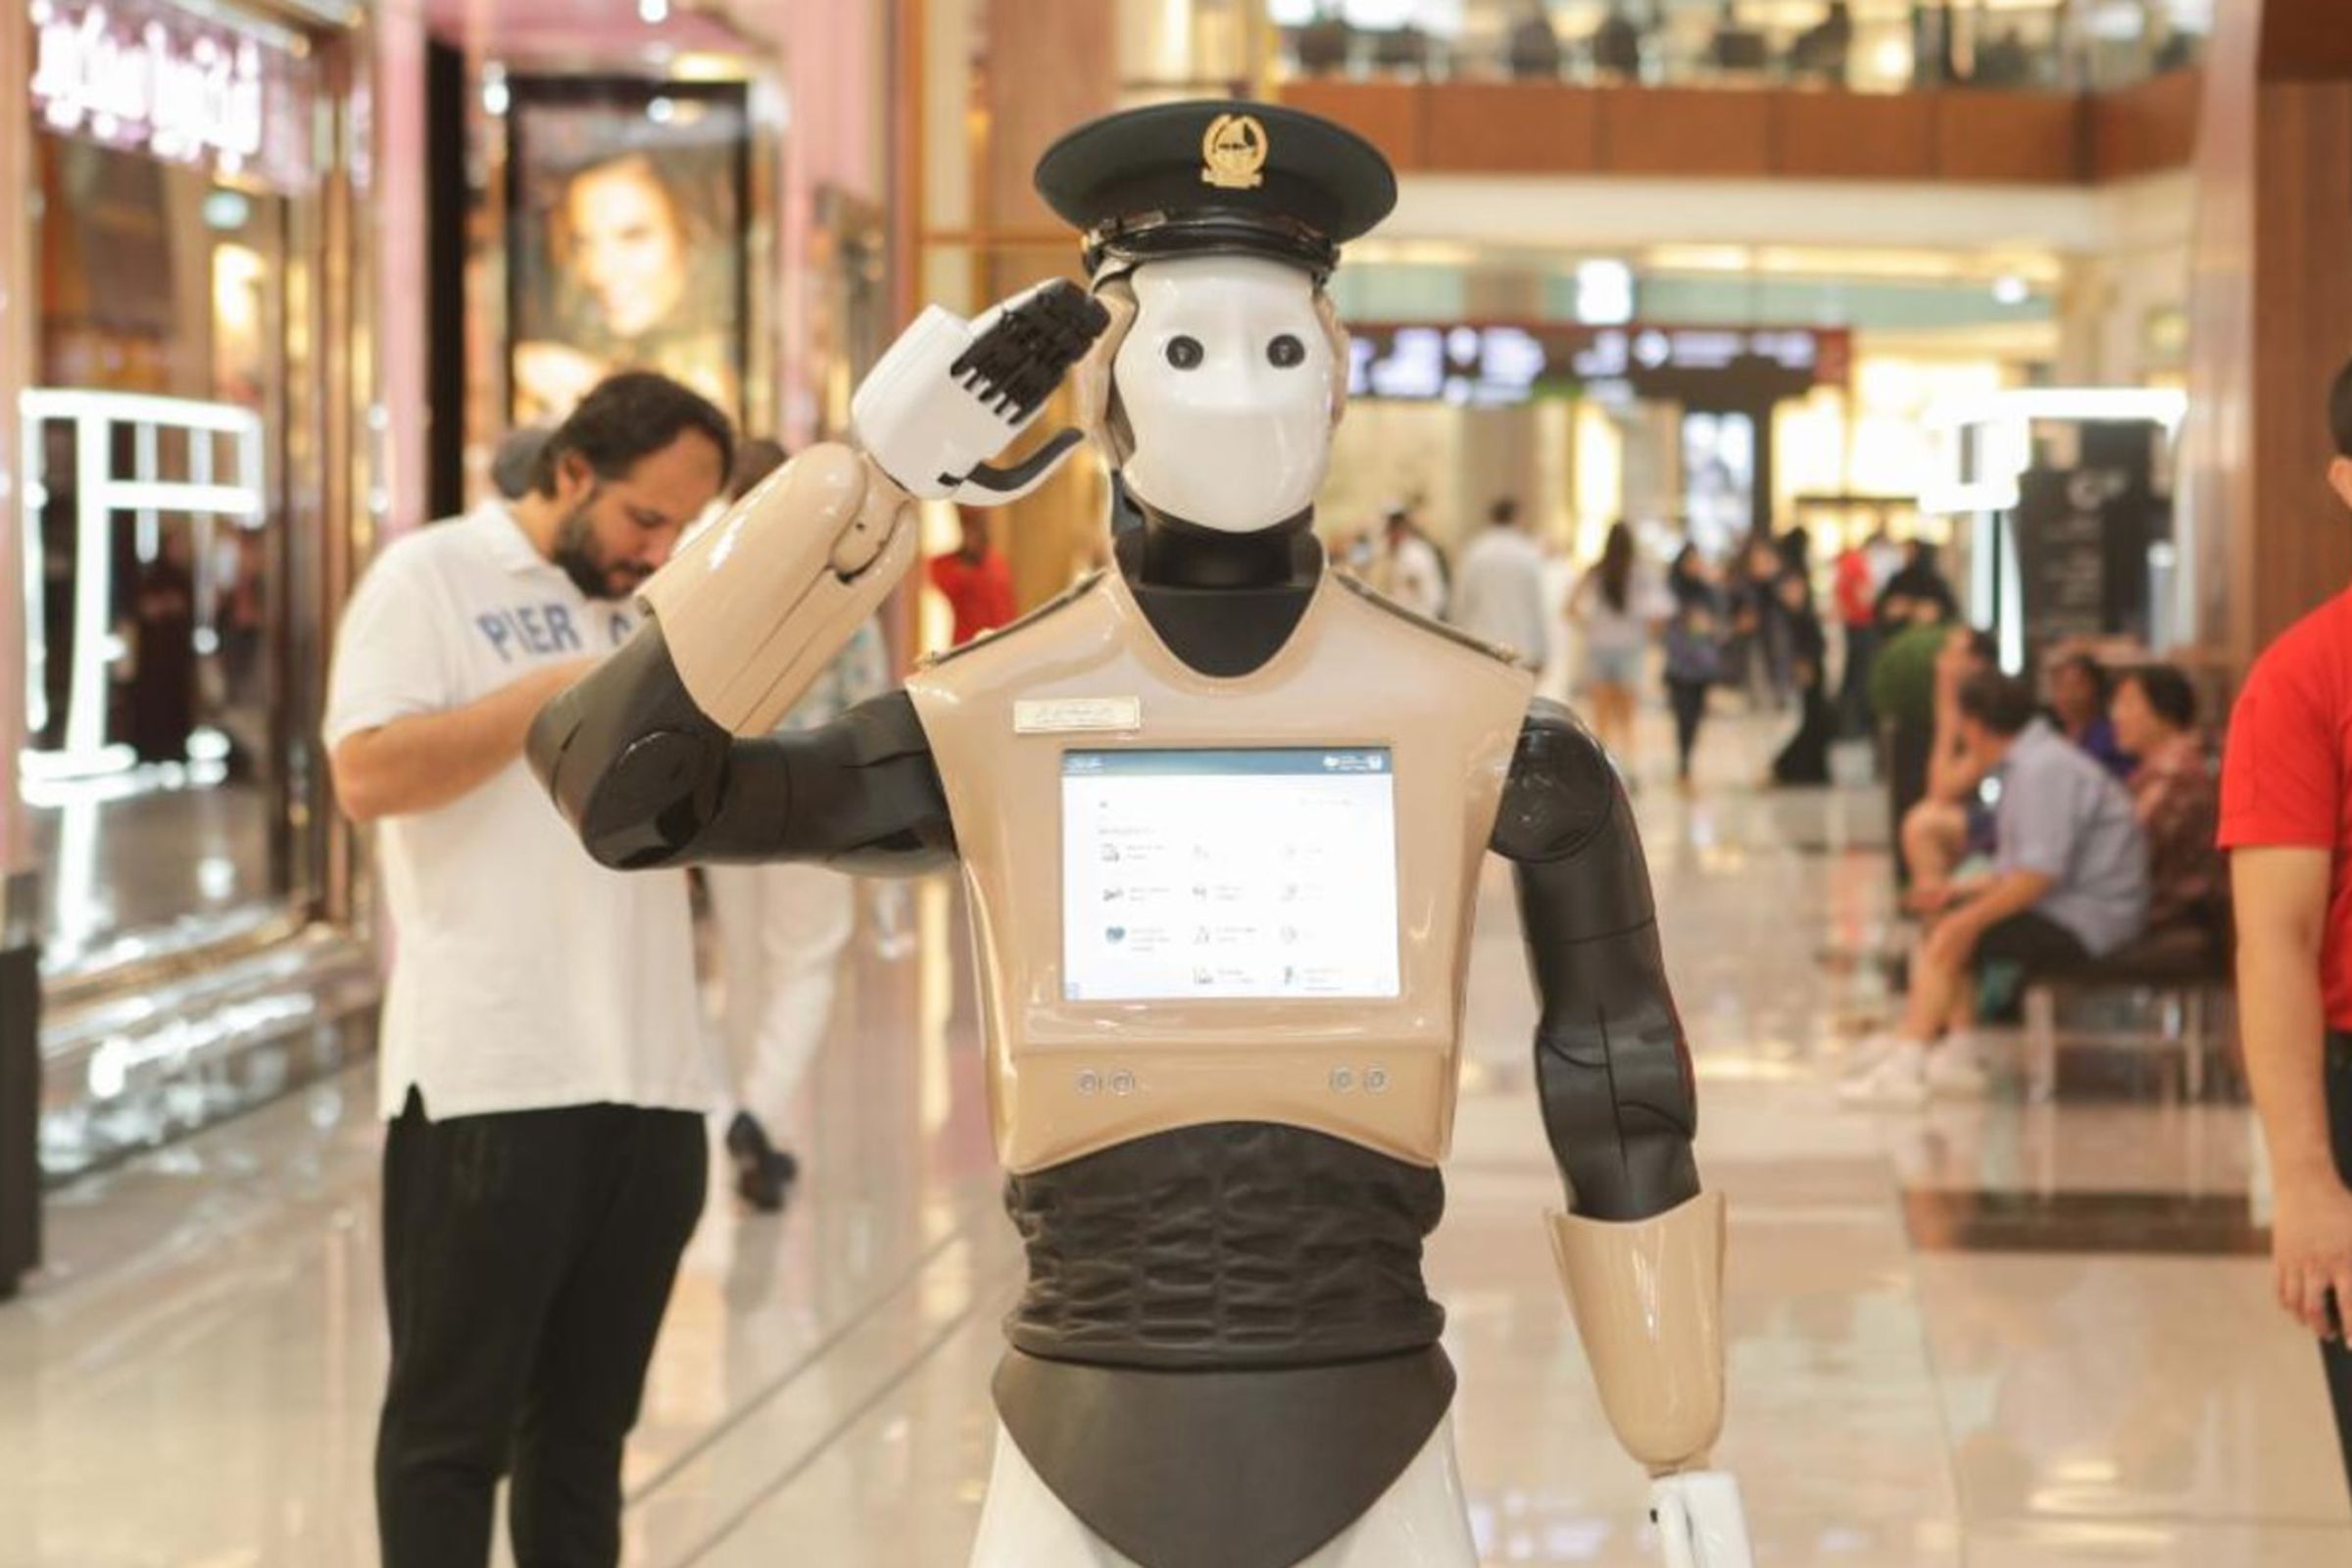 Dubai’s new “robocop” is mostly just a tablet on wheels.